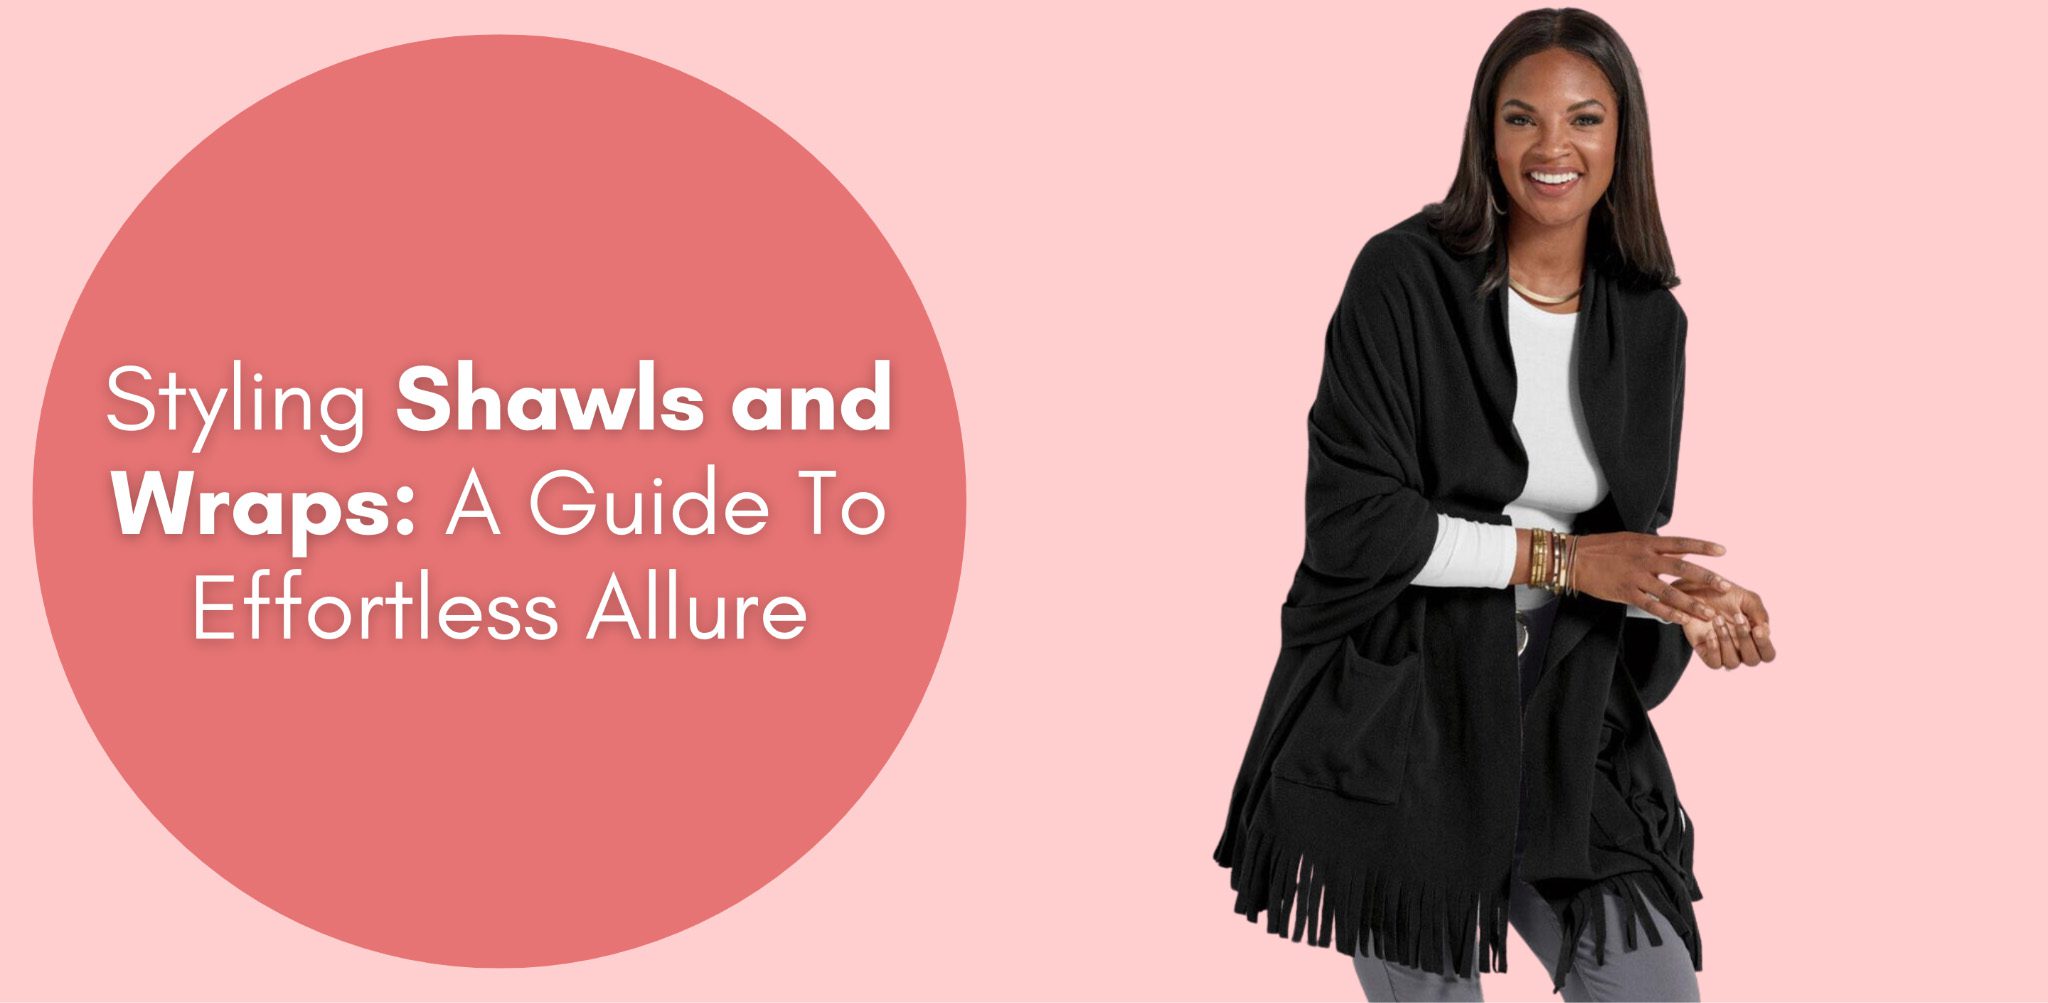 Styling Shawls and Wraps: A Guide To Effortless Allure